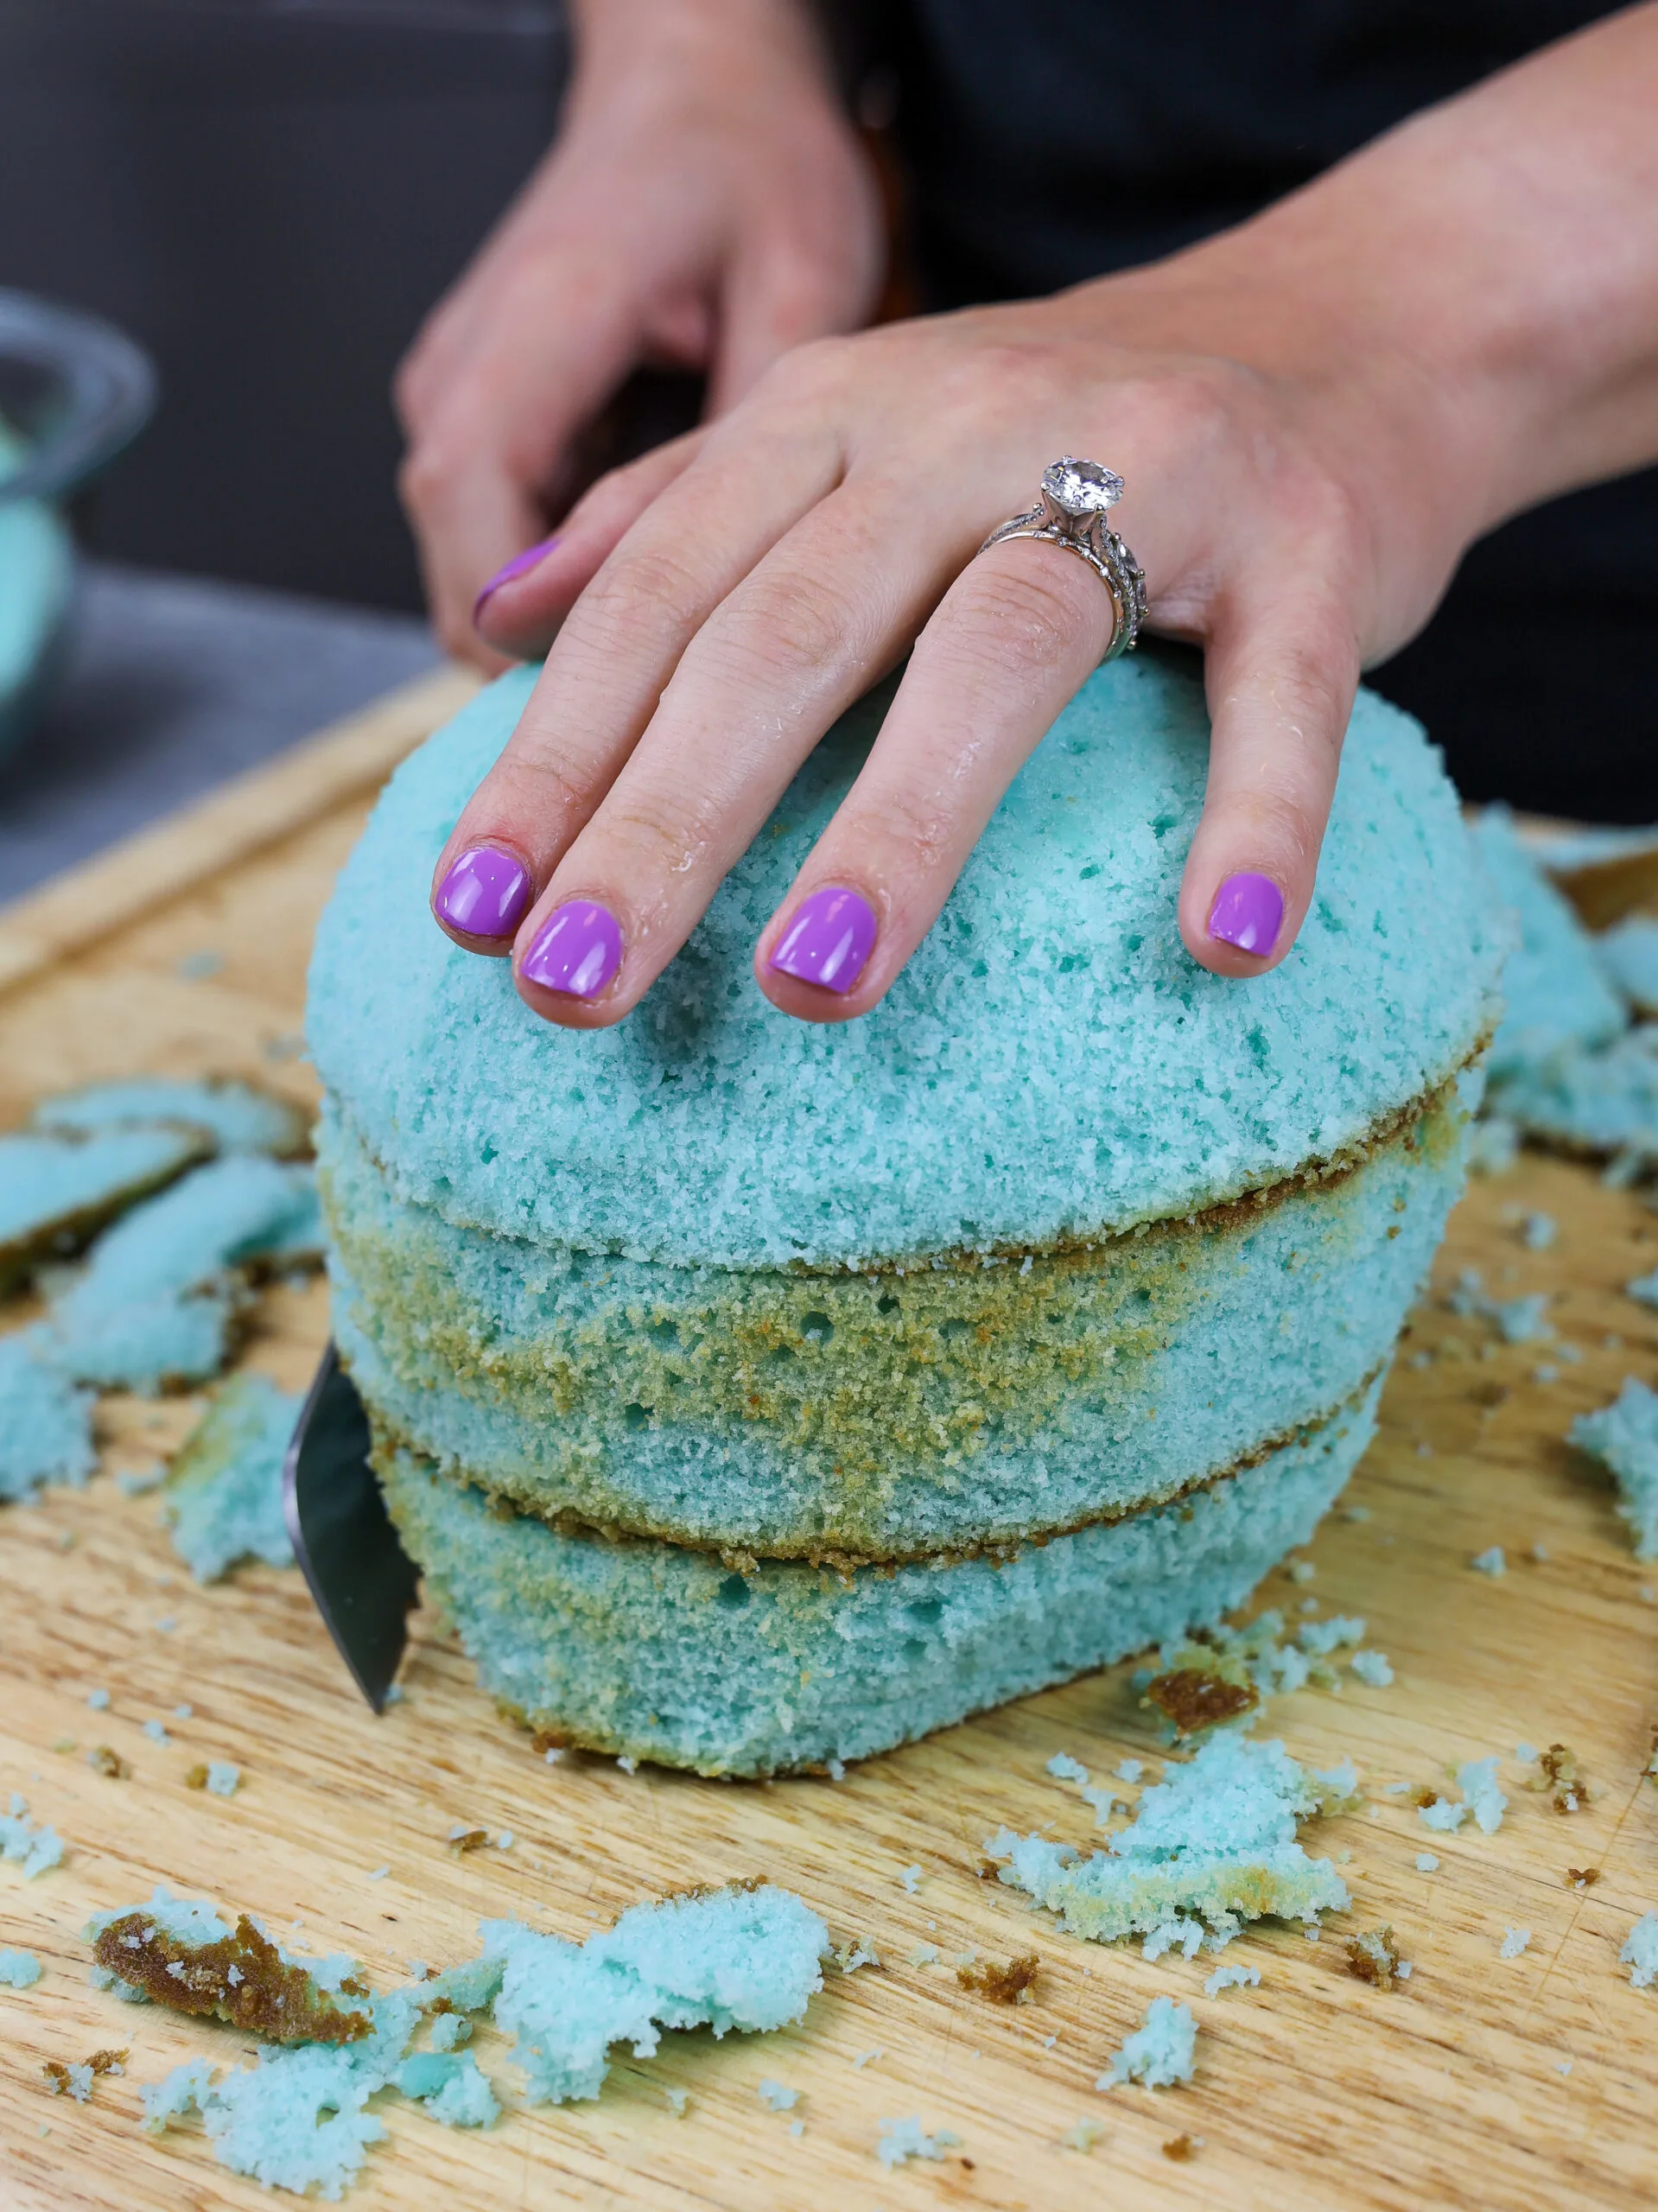 image of blue cake layers being trimmed to make a narwhal cake